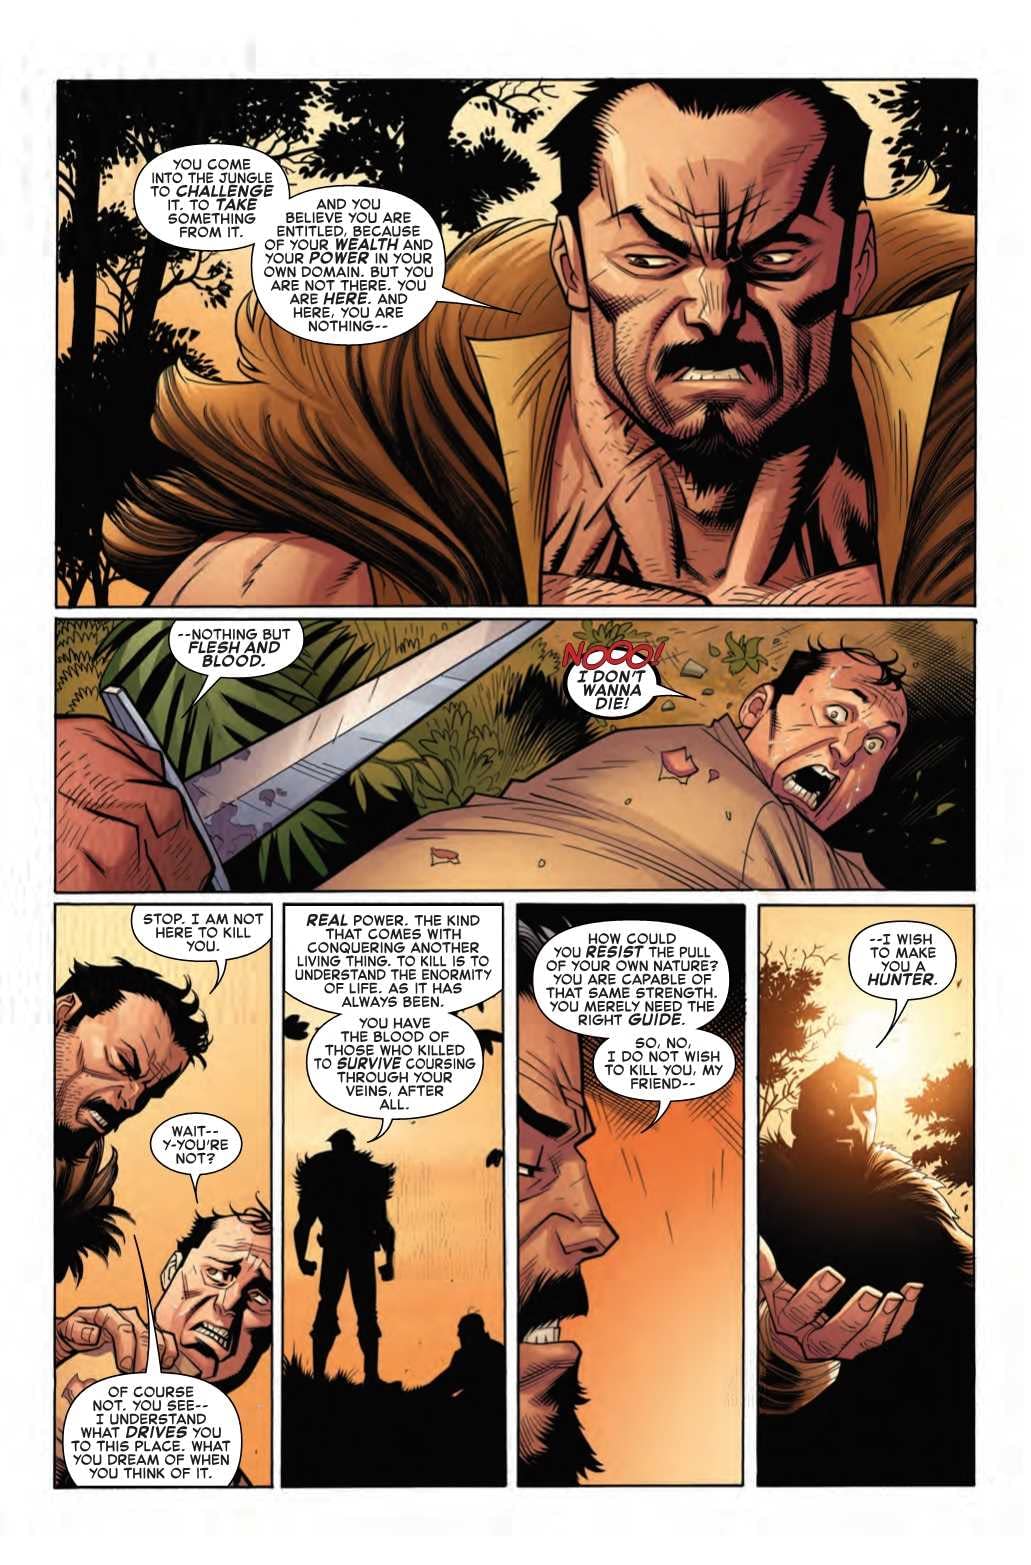 Nick Spencer Rewrites Continuity to Give Kraven His Own Clone Saga in Amazing Spider-Man #16